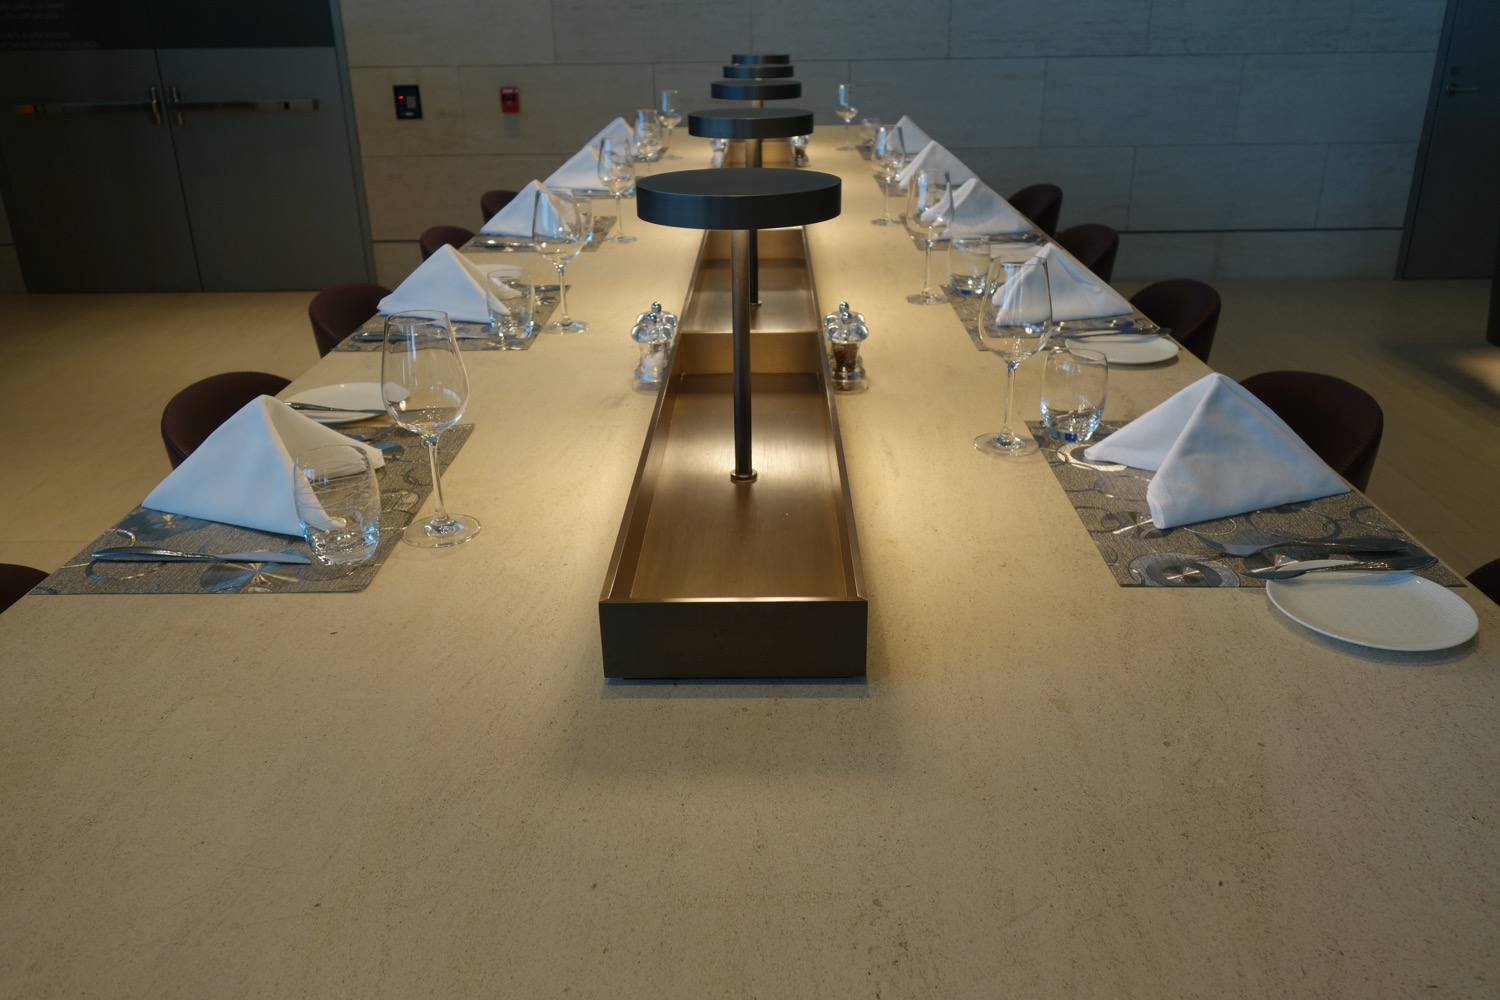 a long table with a black round object on it